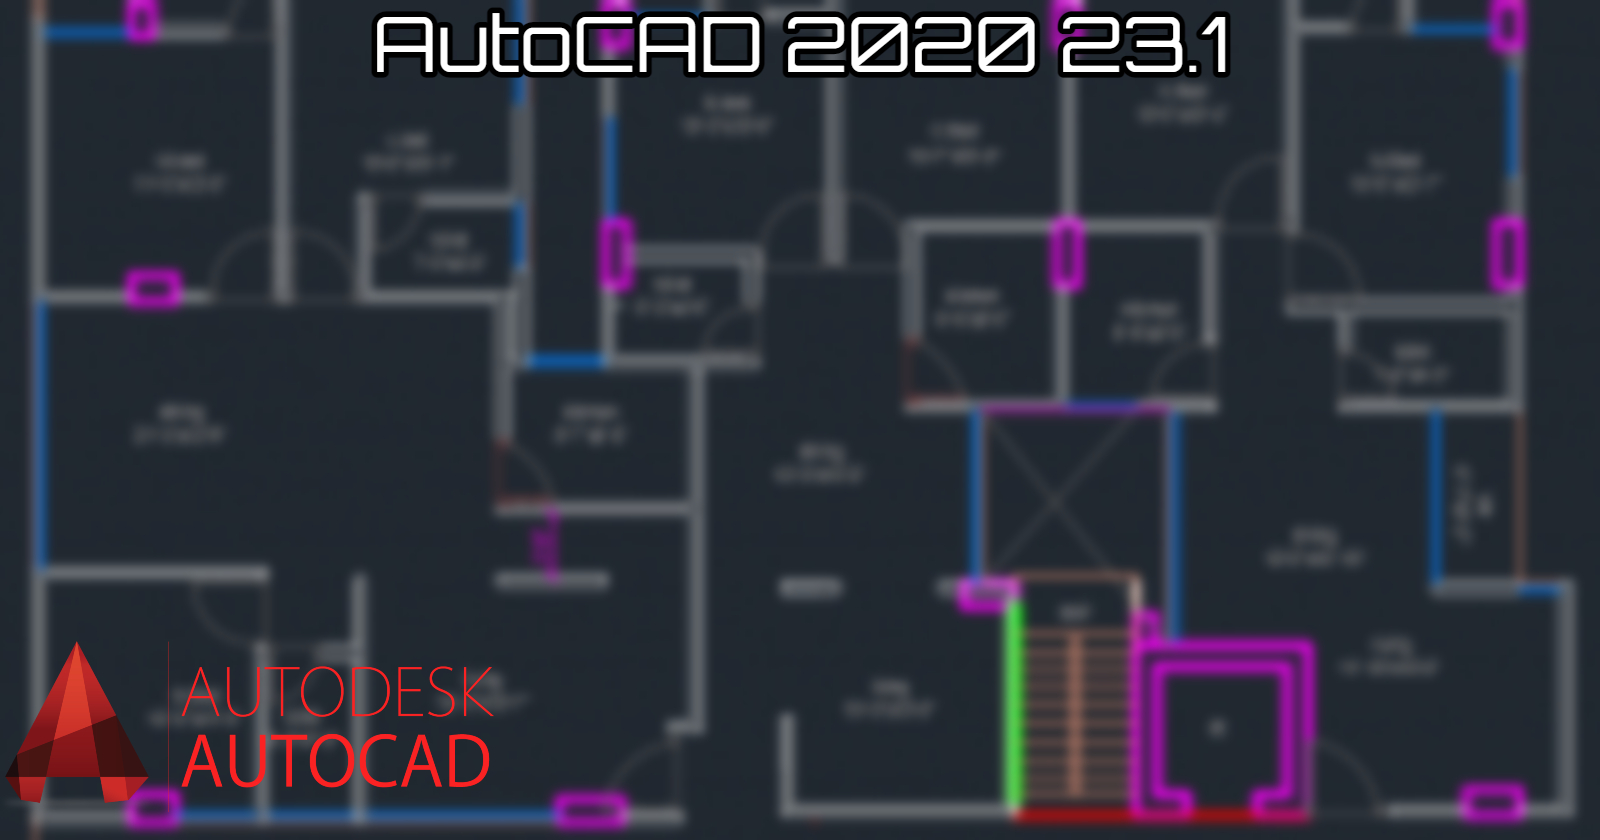 You are currently viewing AutoCAD 2020 23.1